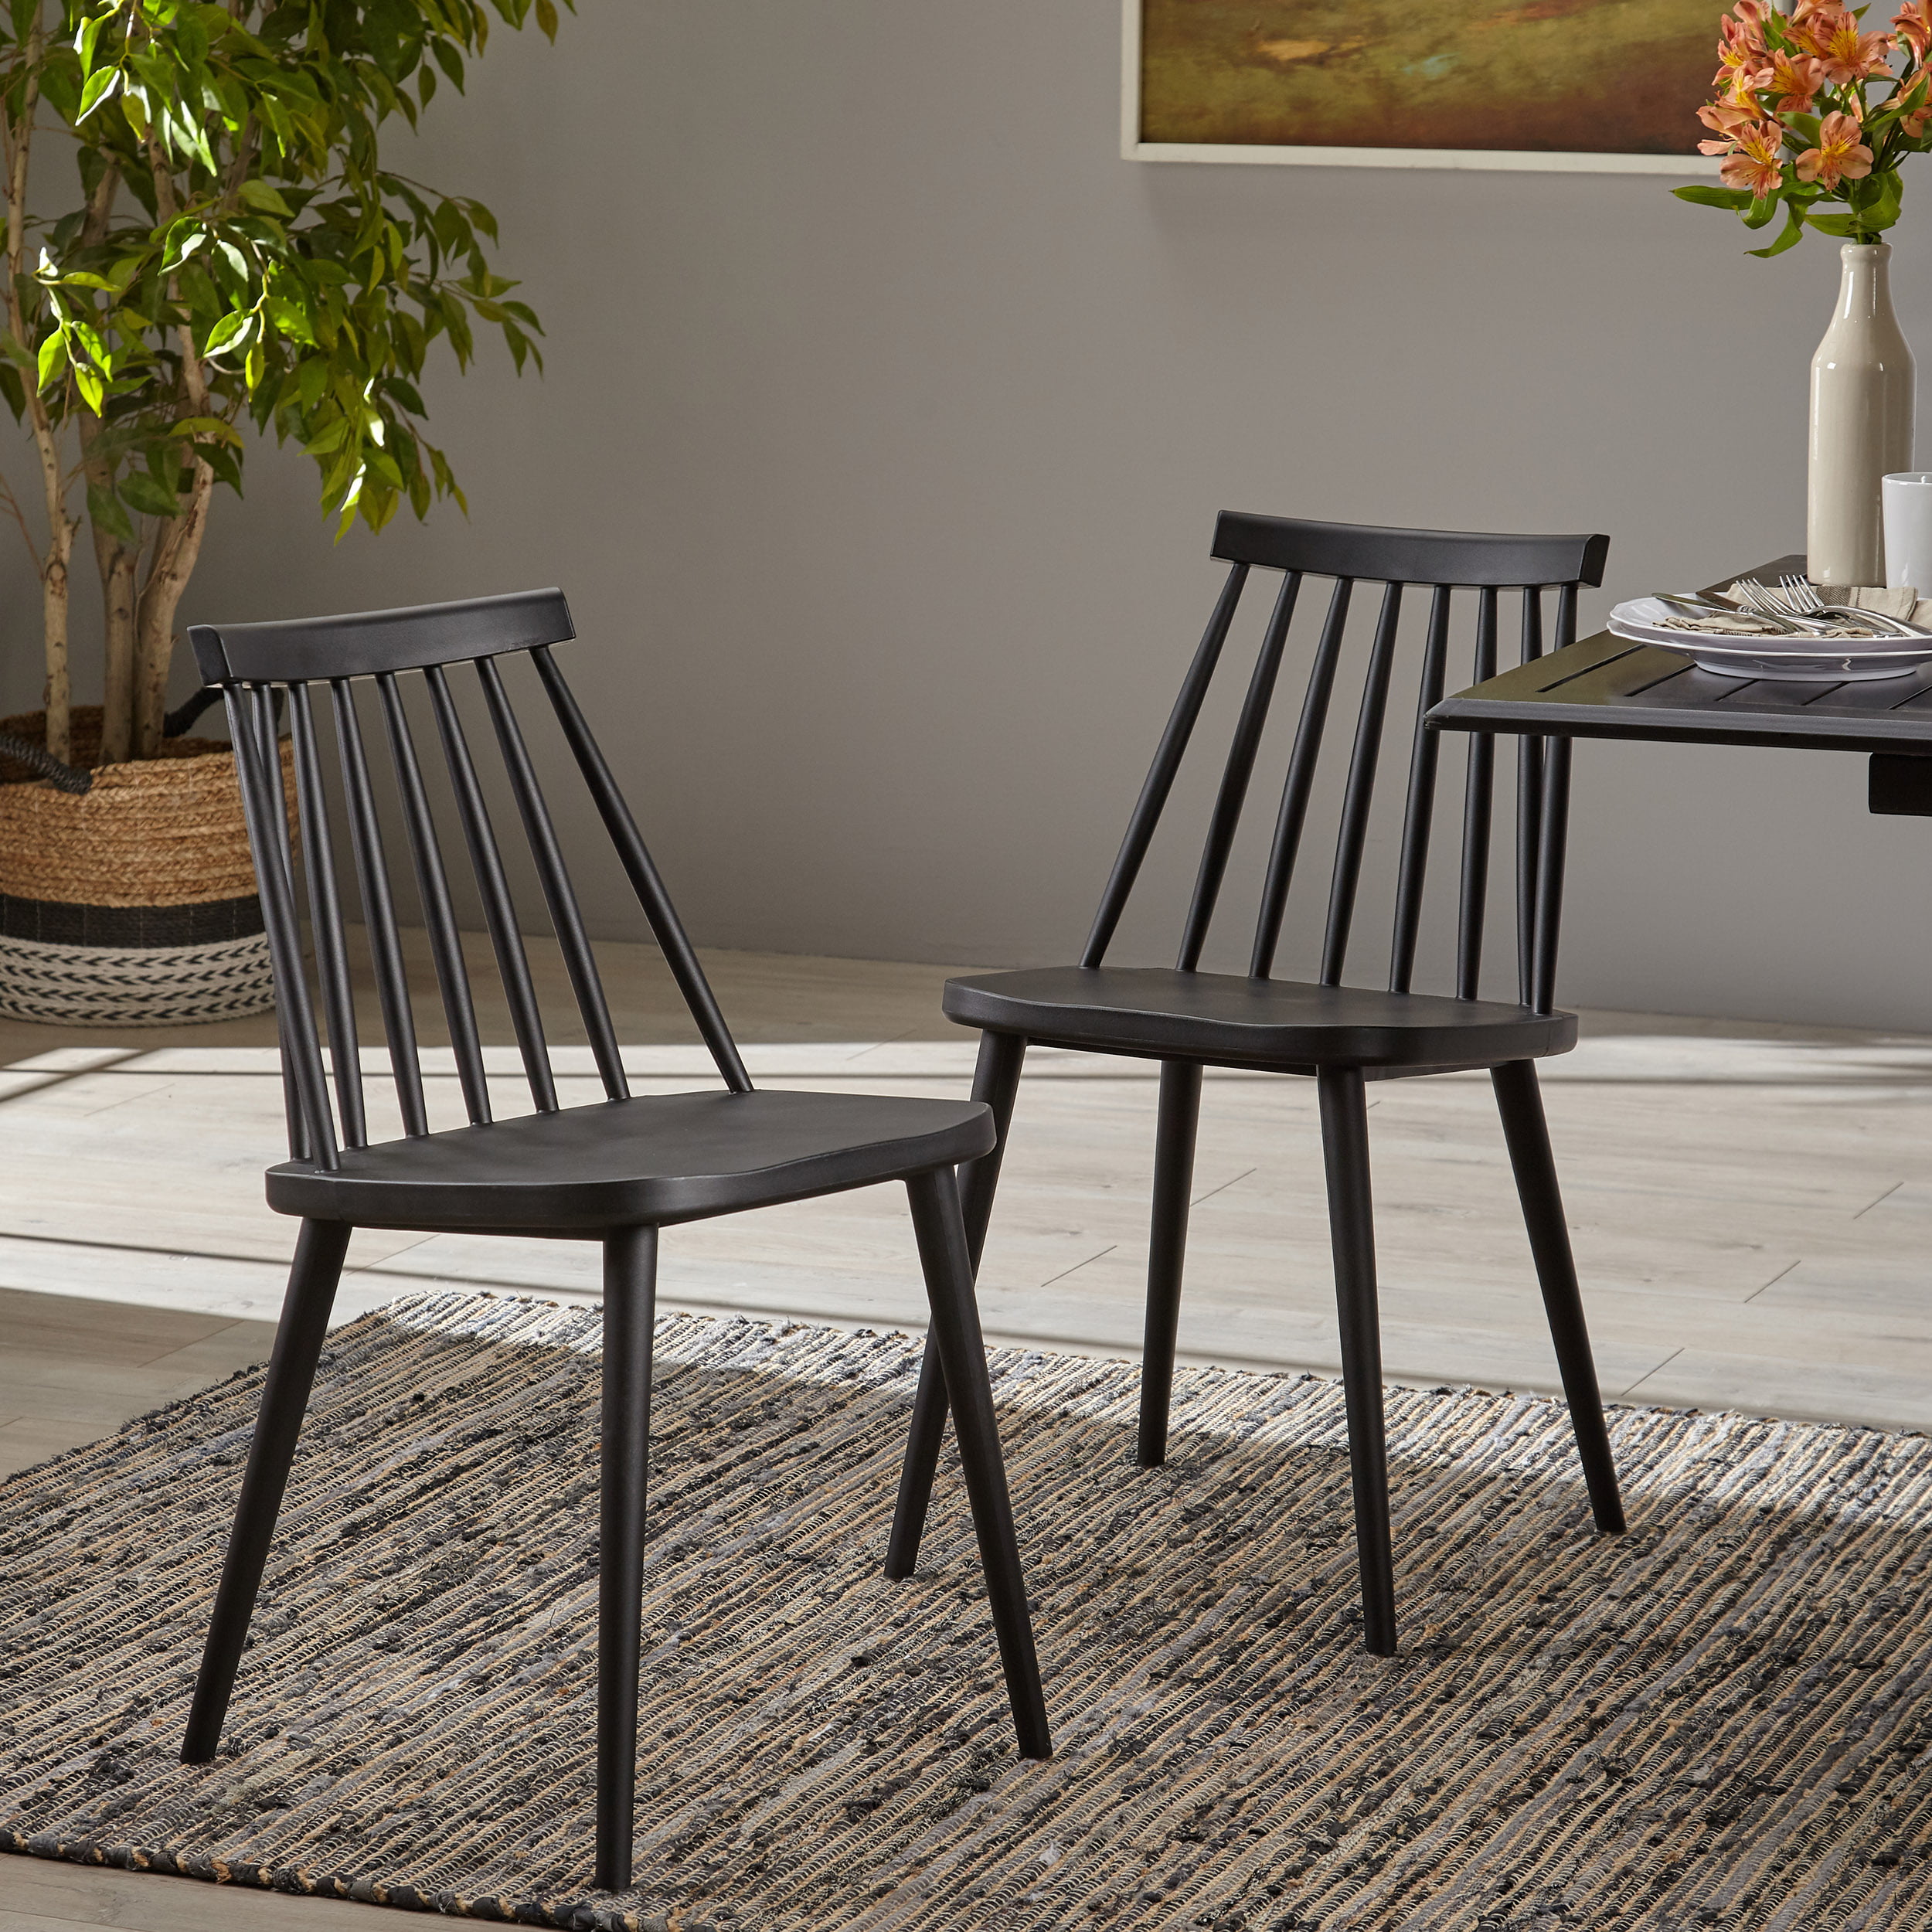 Noble House Erica Farmhouse Spindle-Back Dining Chair, Set of 2, Black